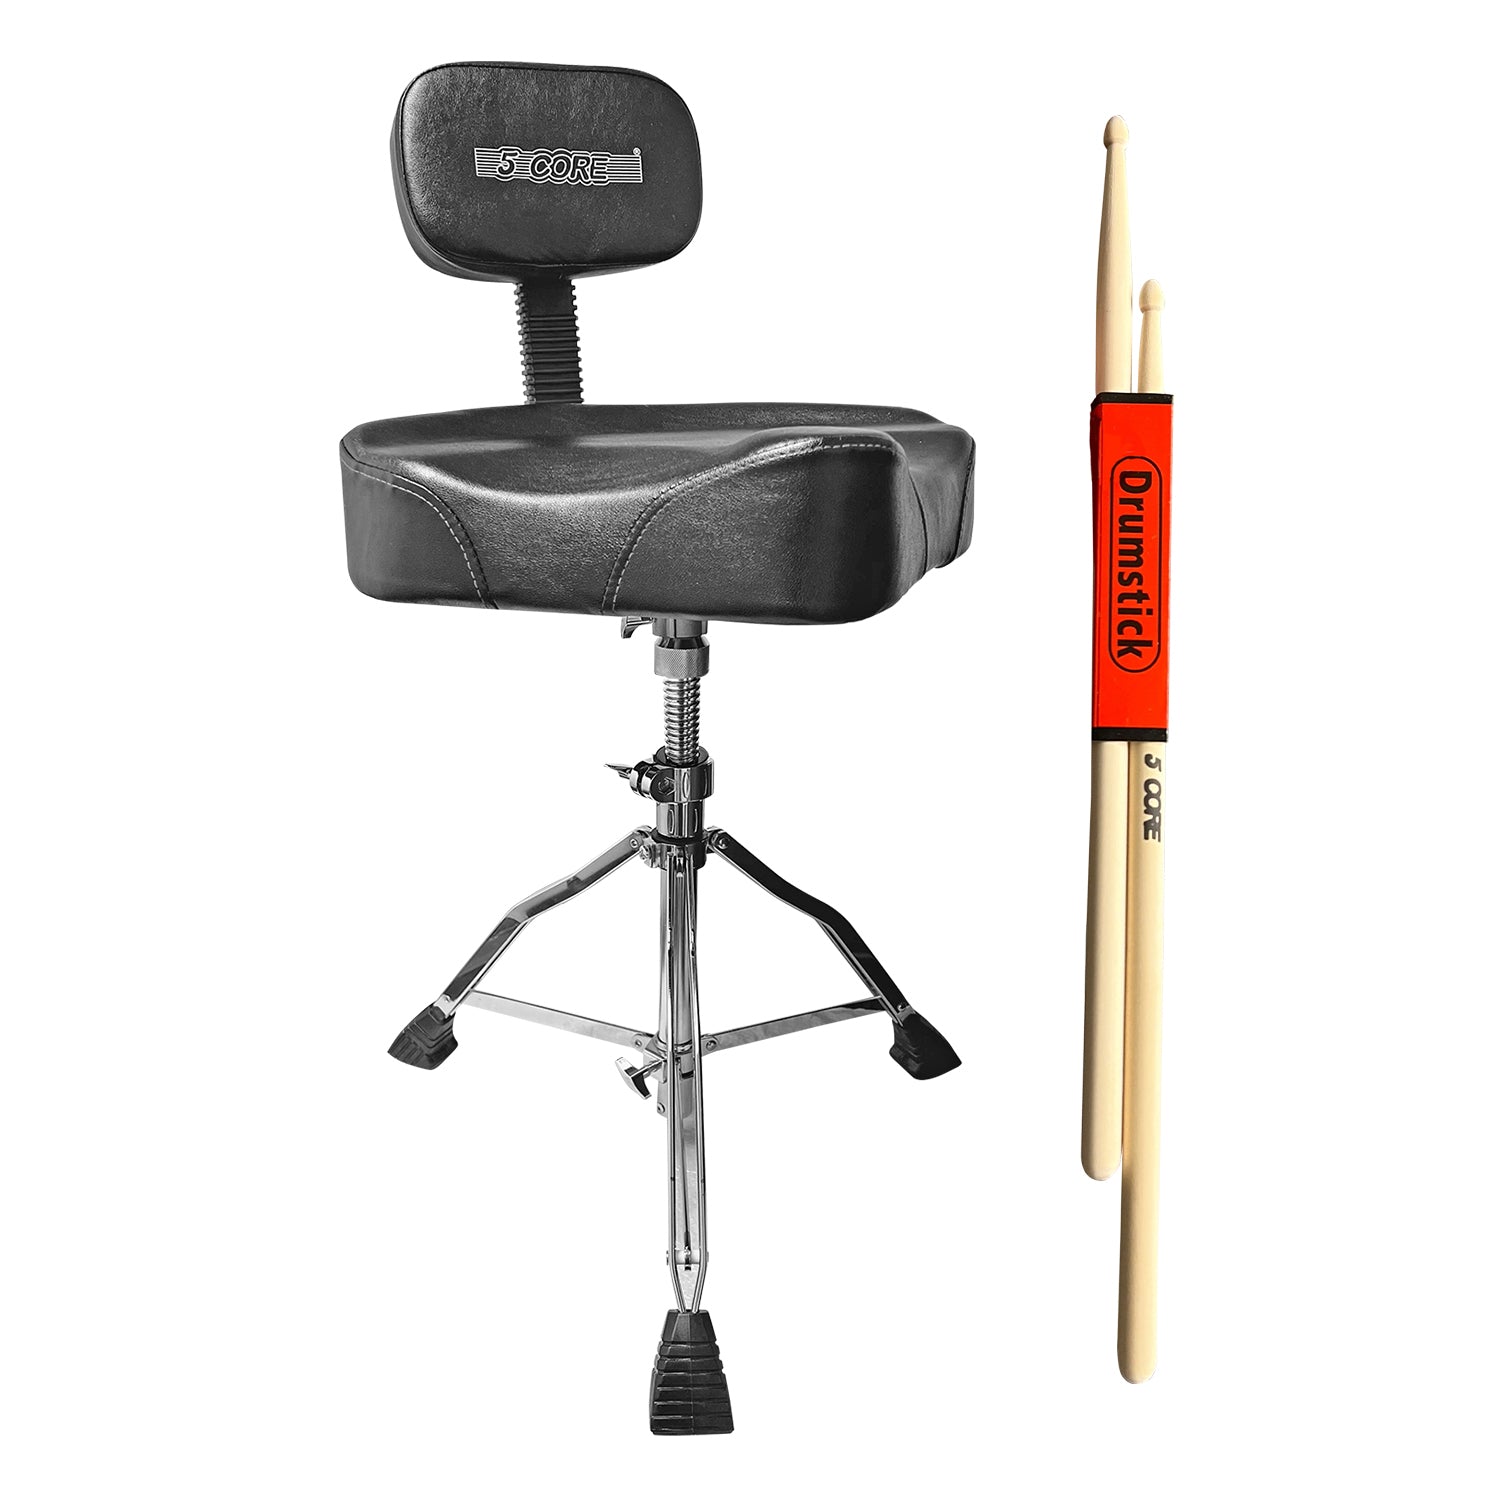 5 Core Drum Throne Comfortable Padded Stool Swivel Height Adjustable Music DJ Chair with Backrest